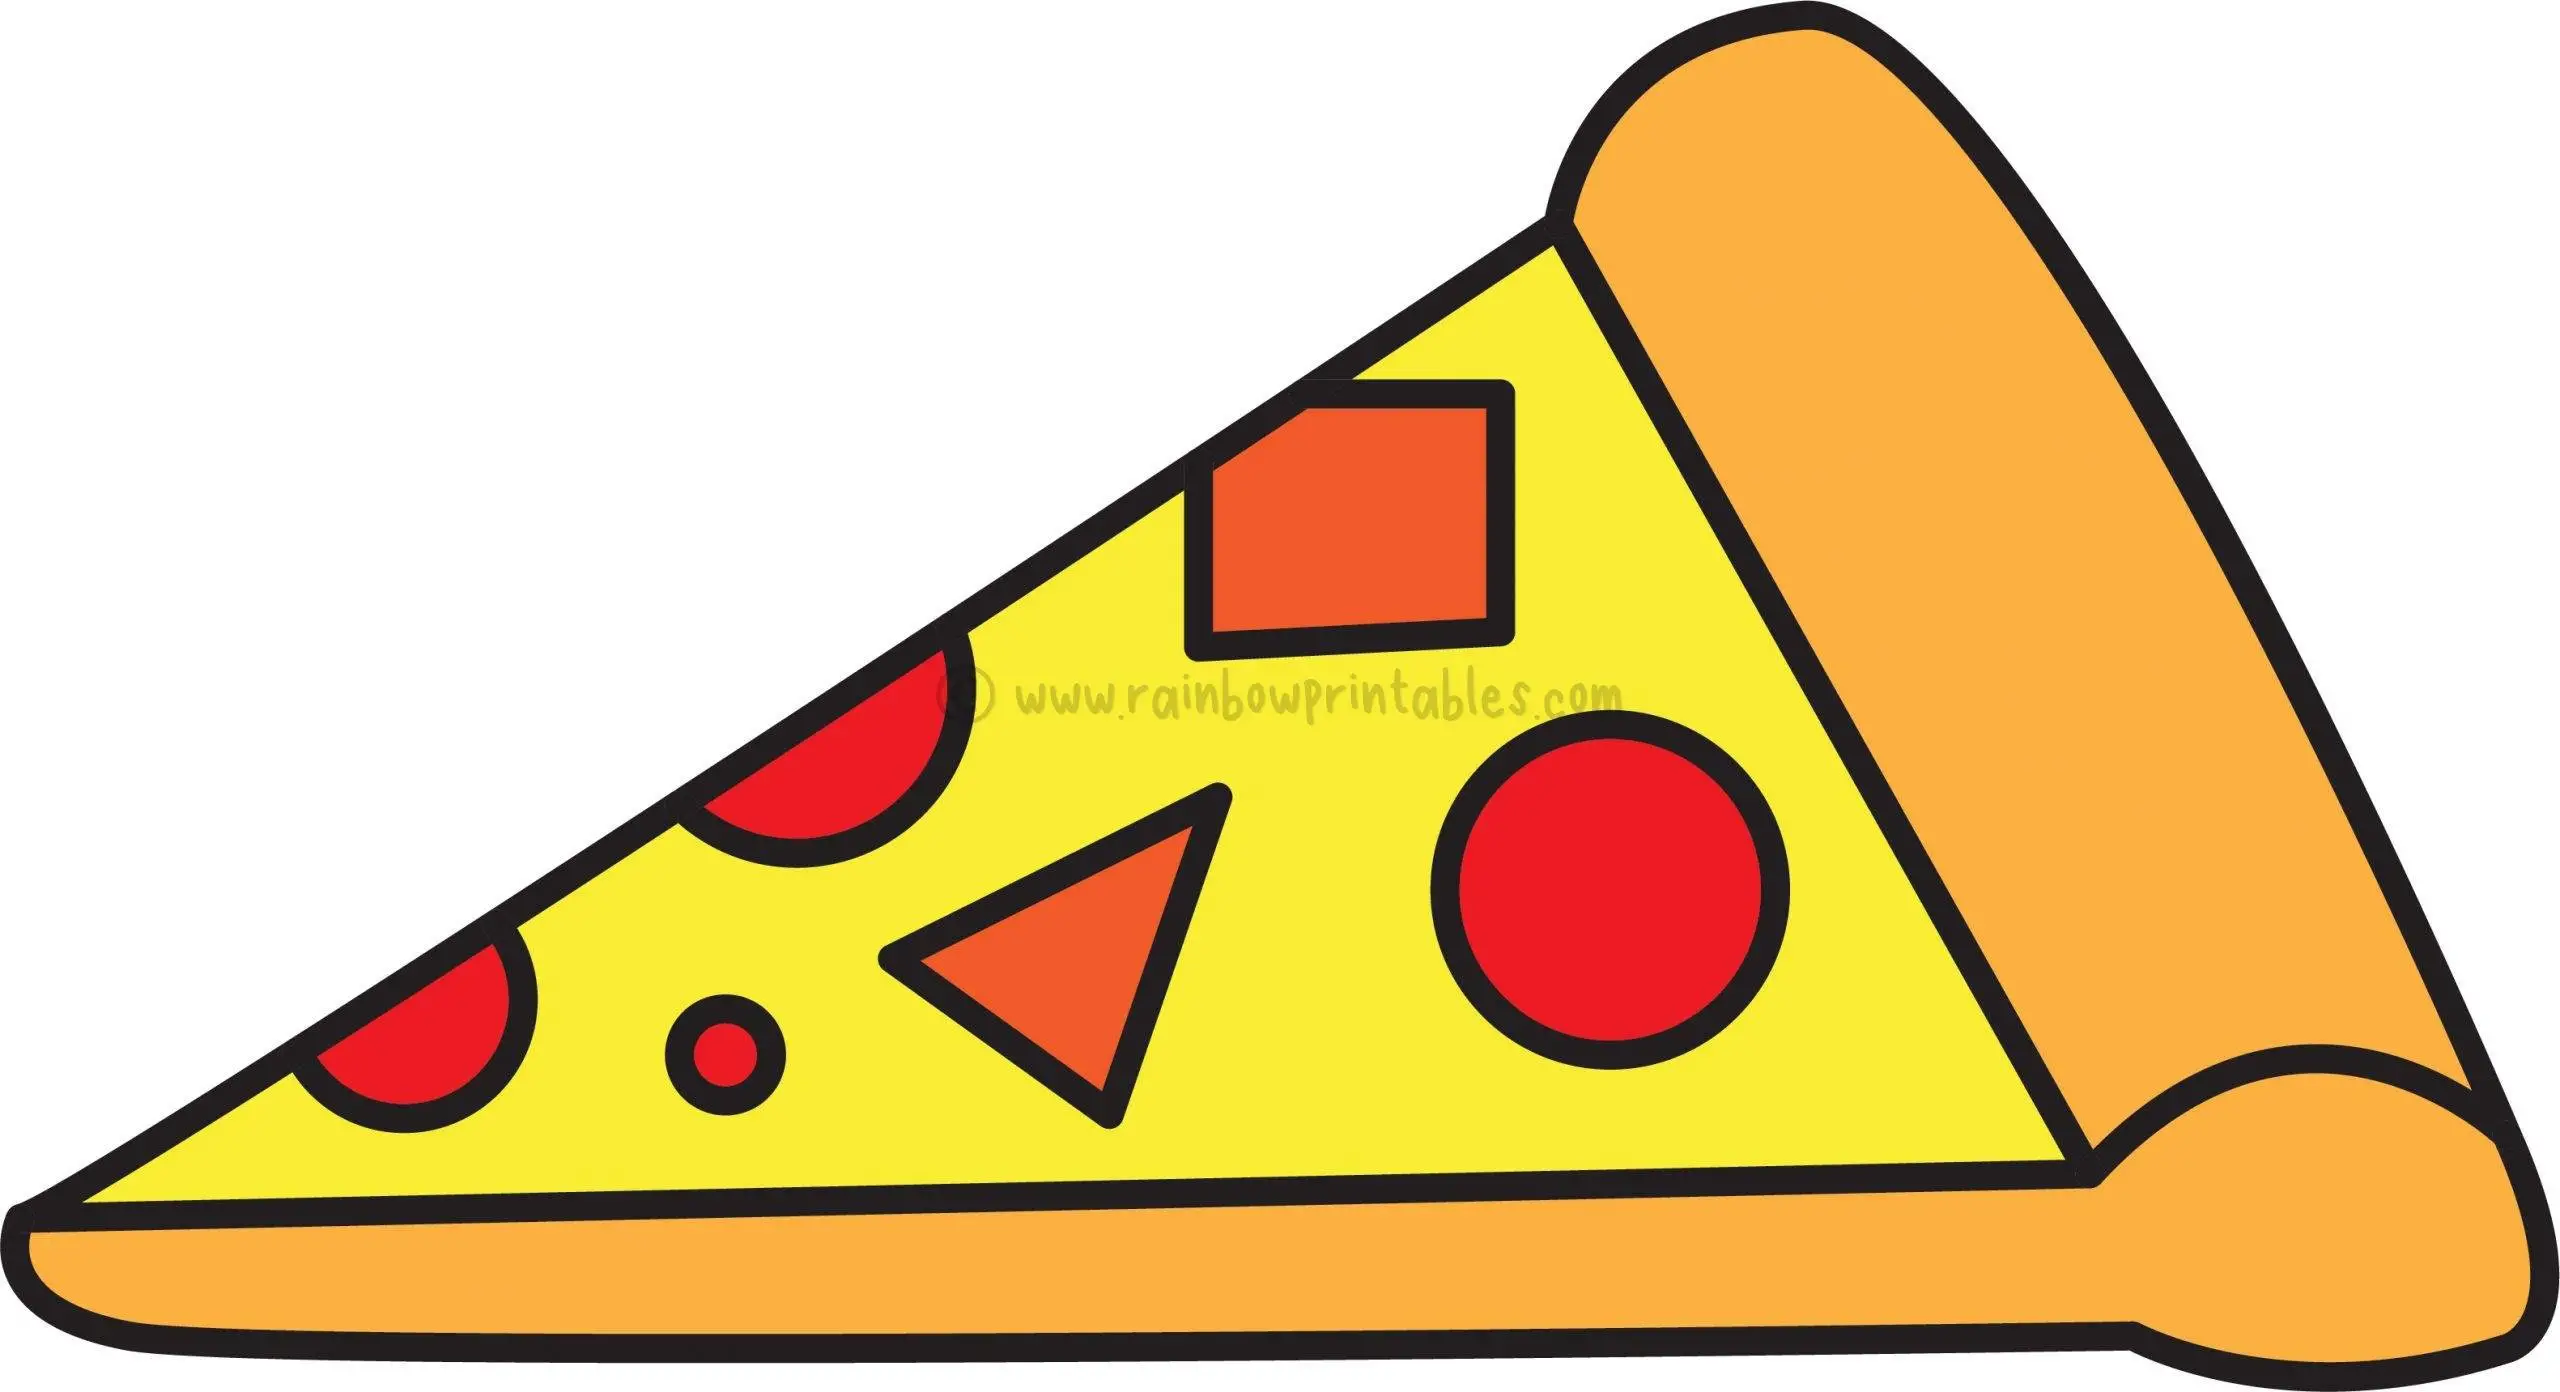 Final-HOW TO DRAW PIZZA SLICE ART PROJECT STEP BY STEP FOR KIDS TUTORIAL